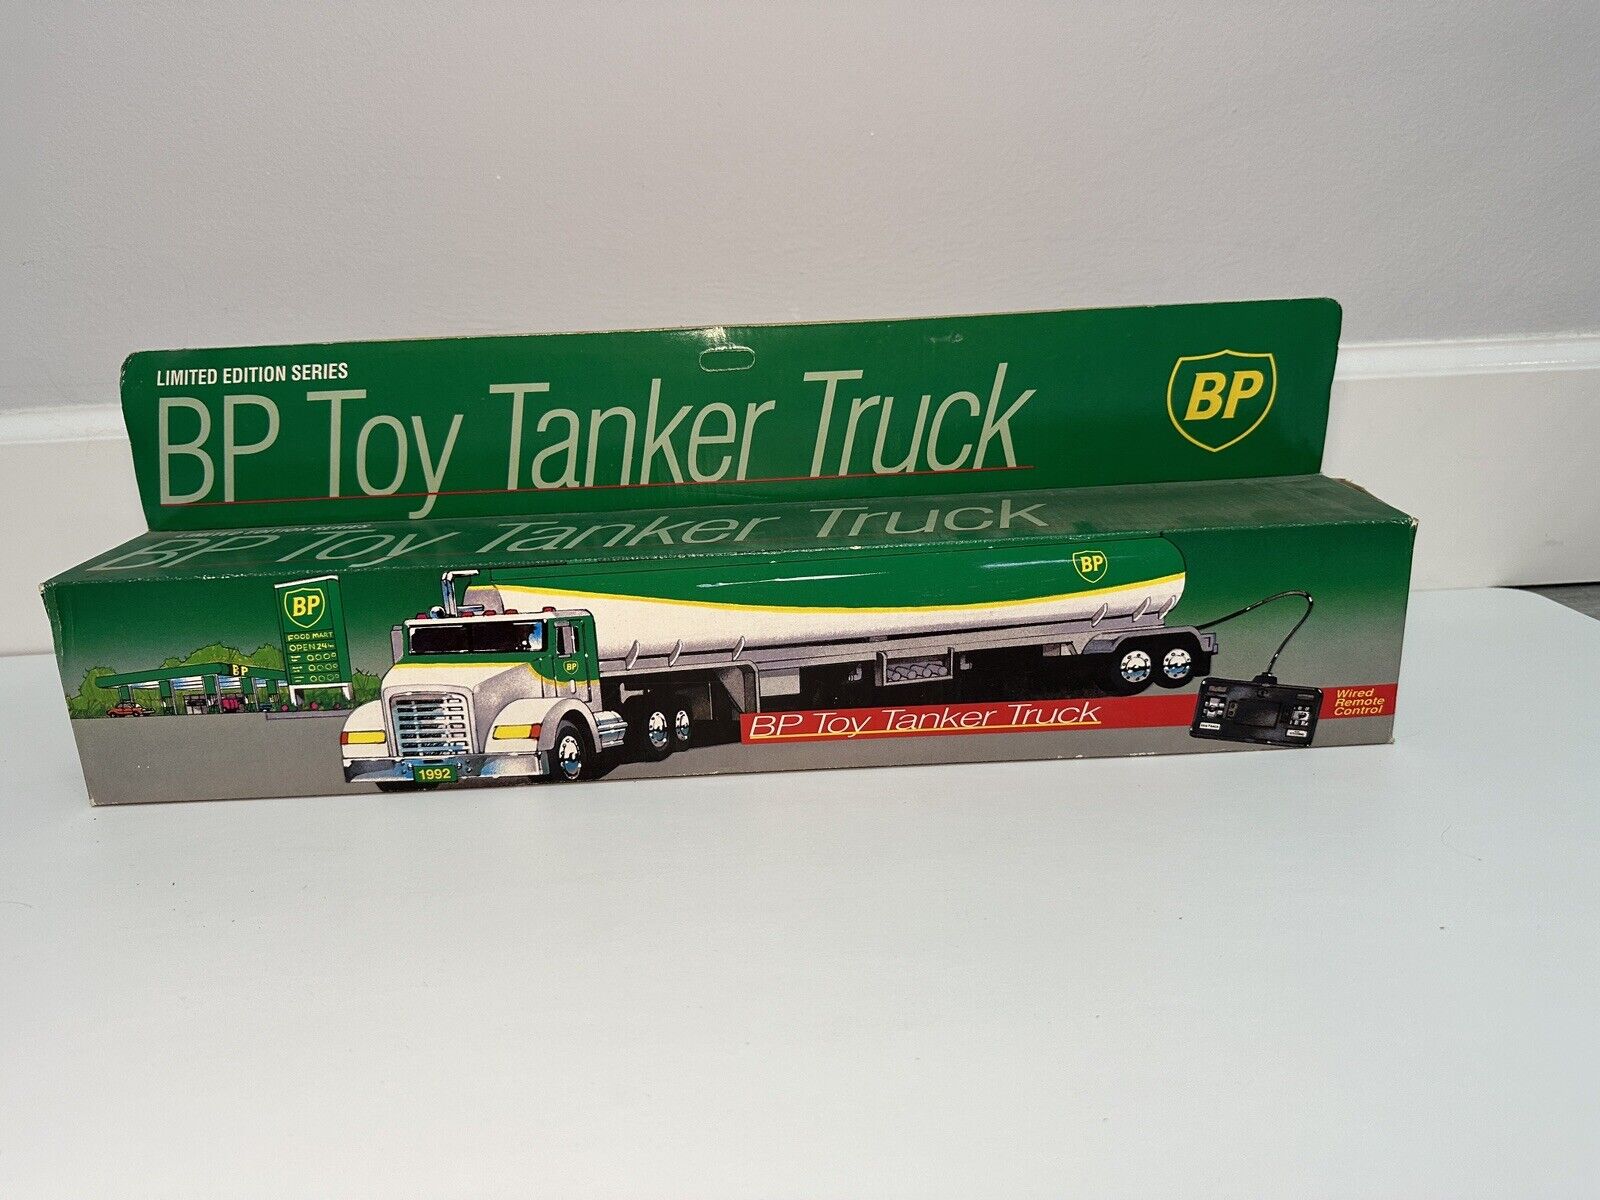 1992 BP Toy Tanker Truck, Limited Edition Series